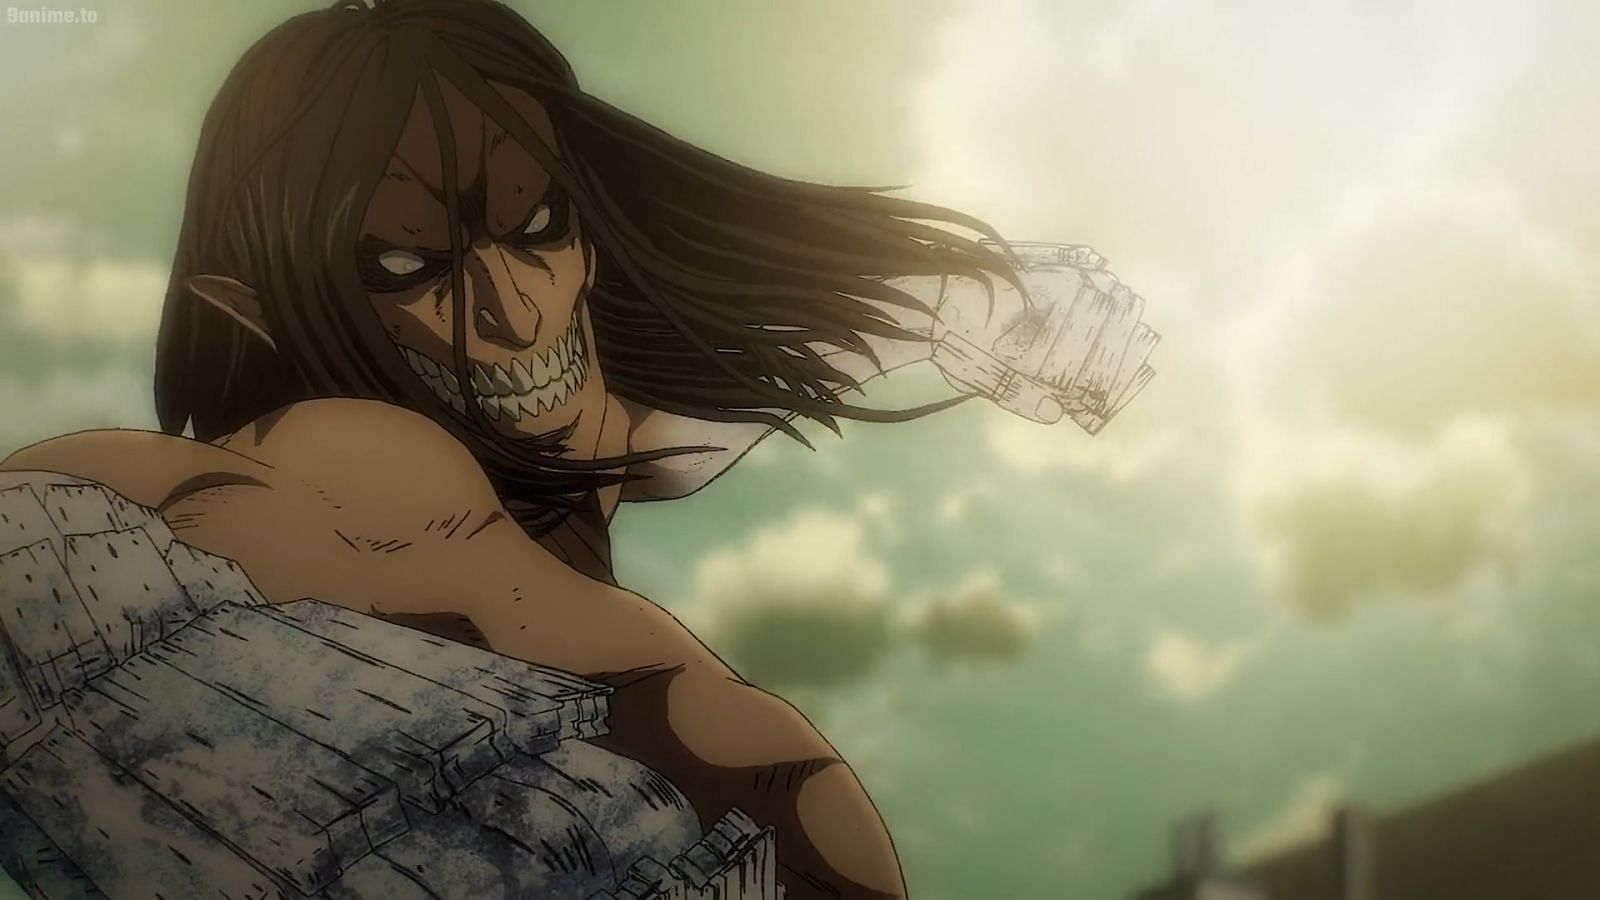 Attack on Titan Season 4 Part 2: What to expect in Episode 2